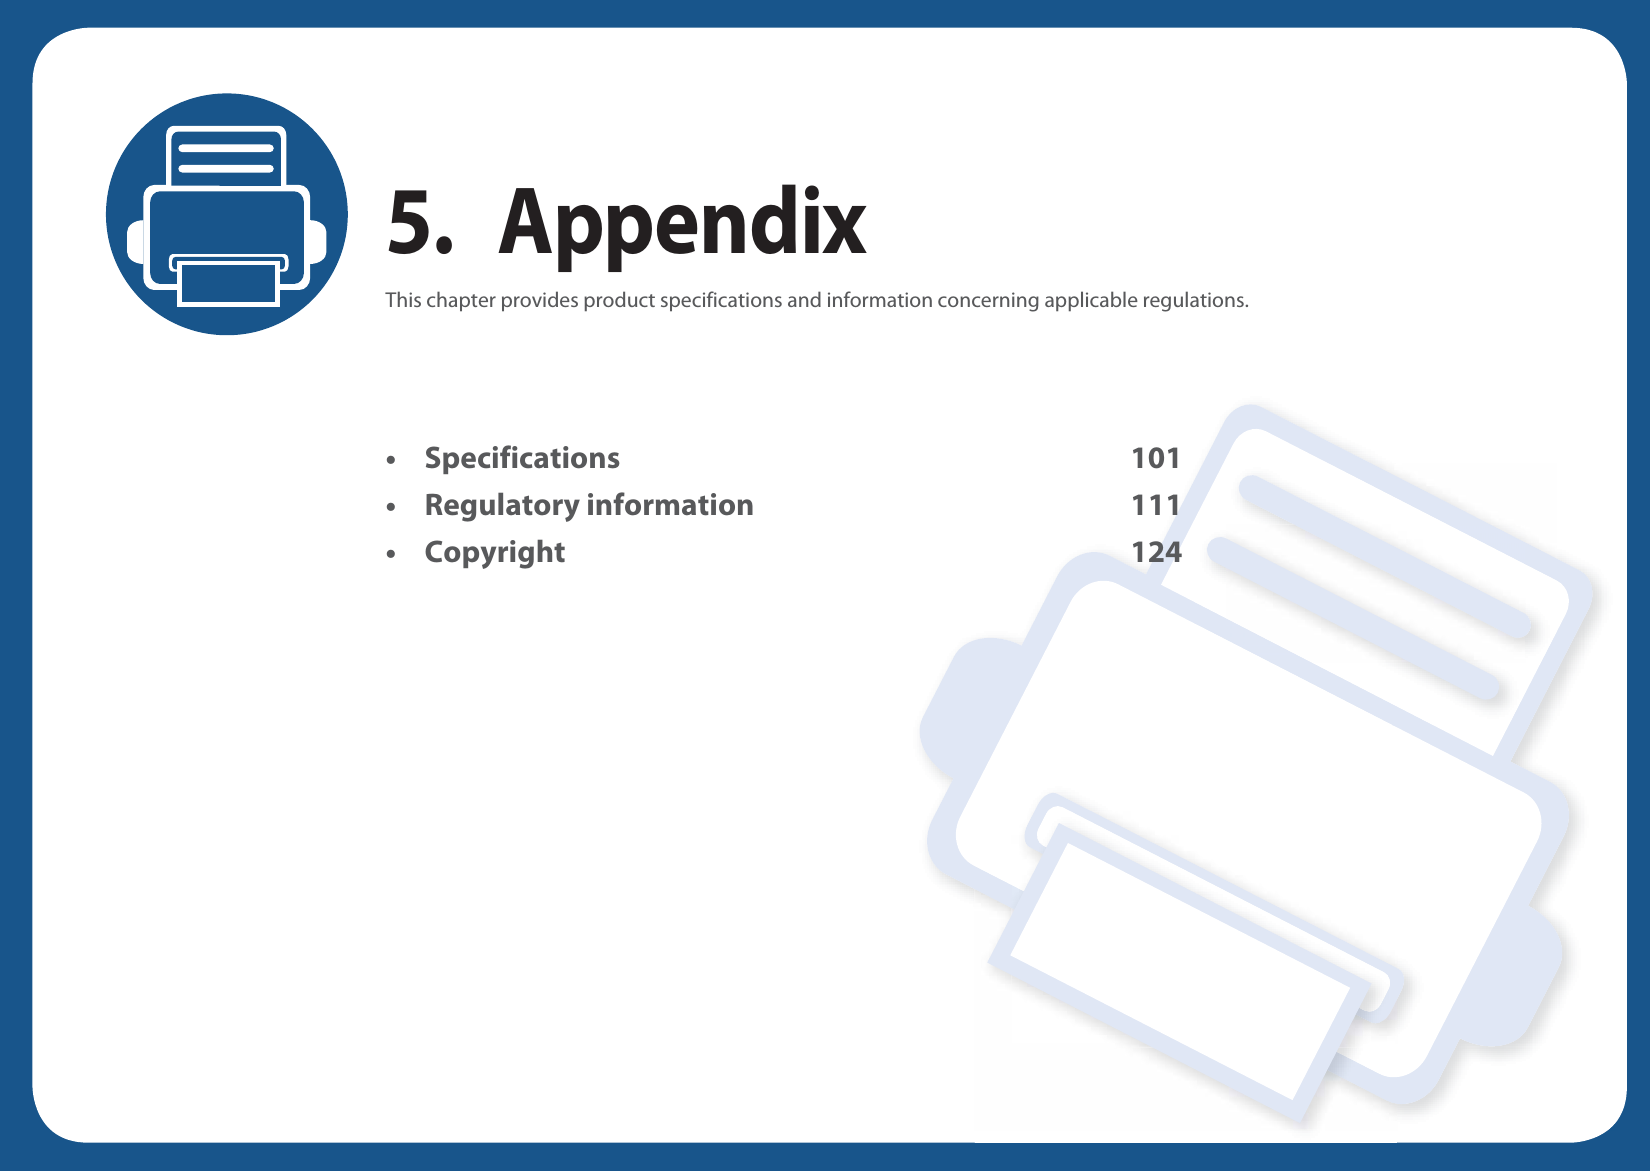 5. AppendixThis chapter provides product specifications and information concerning applicable regulations.• Specifications 101• Regulatory information 111• Copyright 124